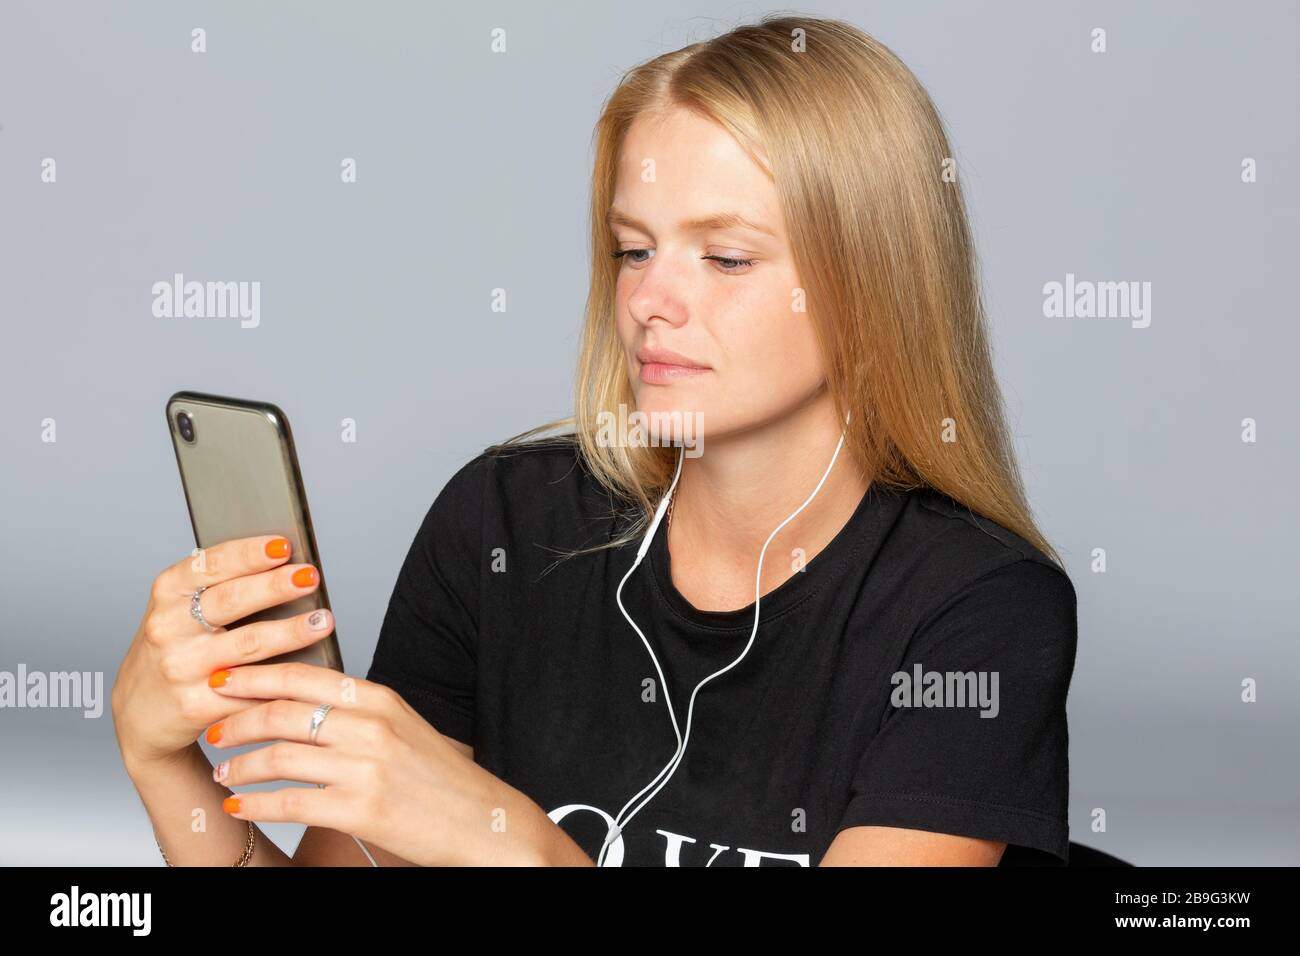 Young woman listening to music with smart phone and headphones Stock Photo